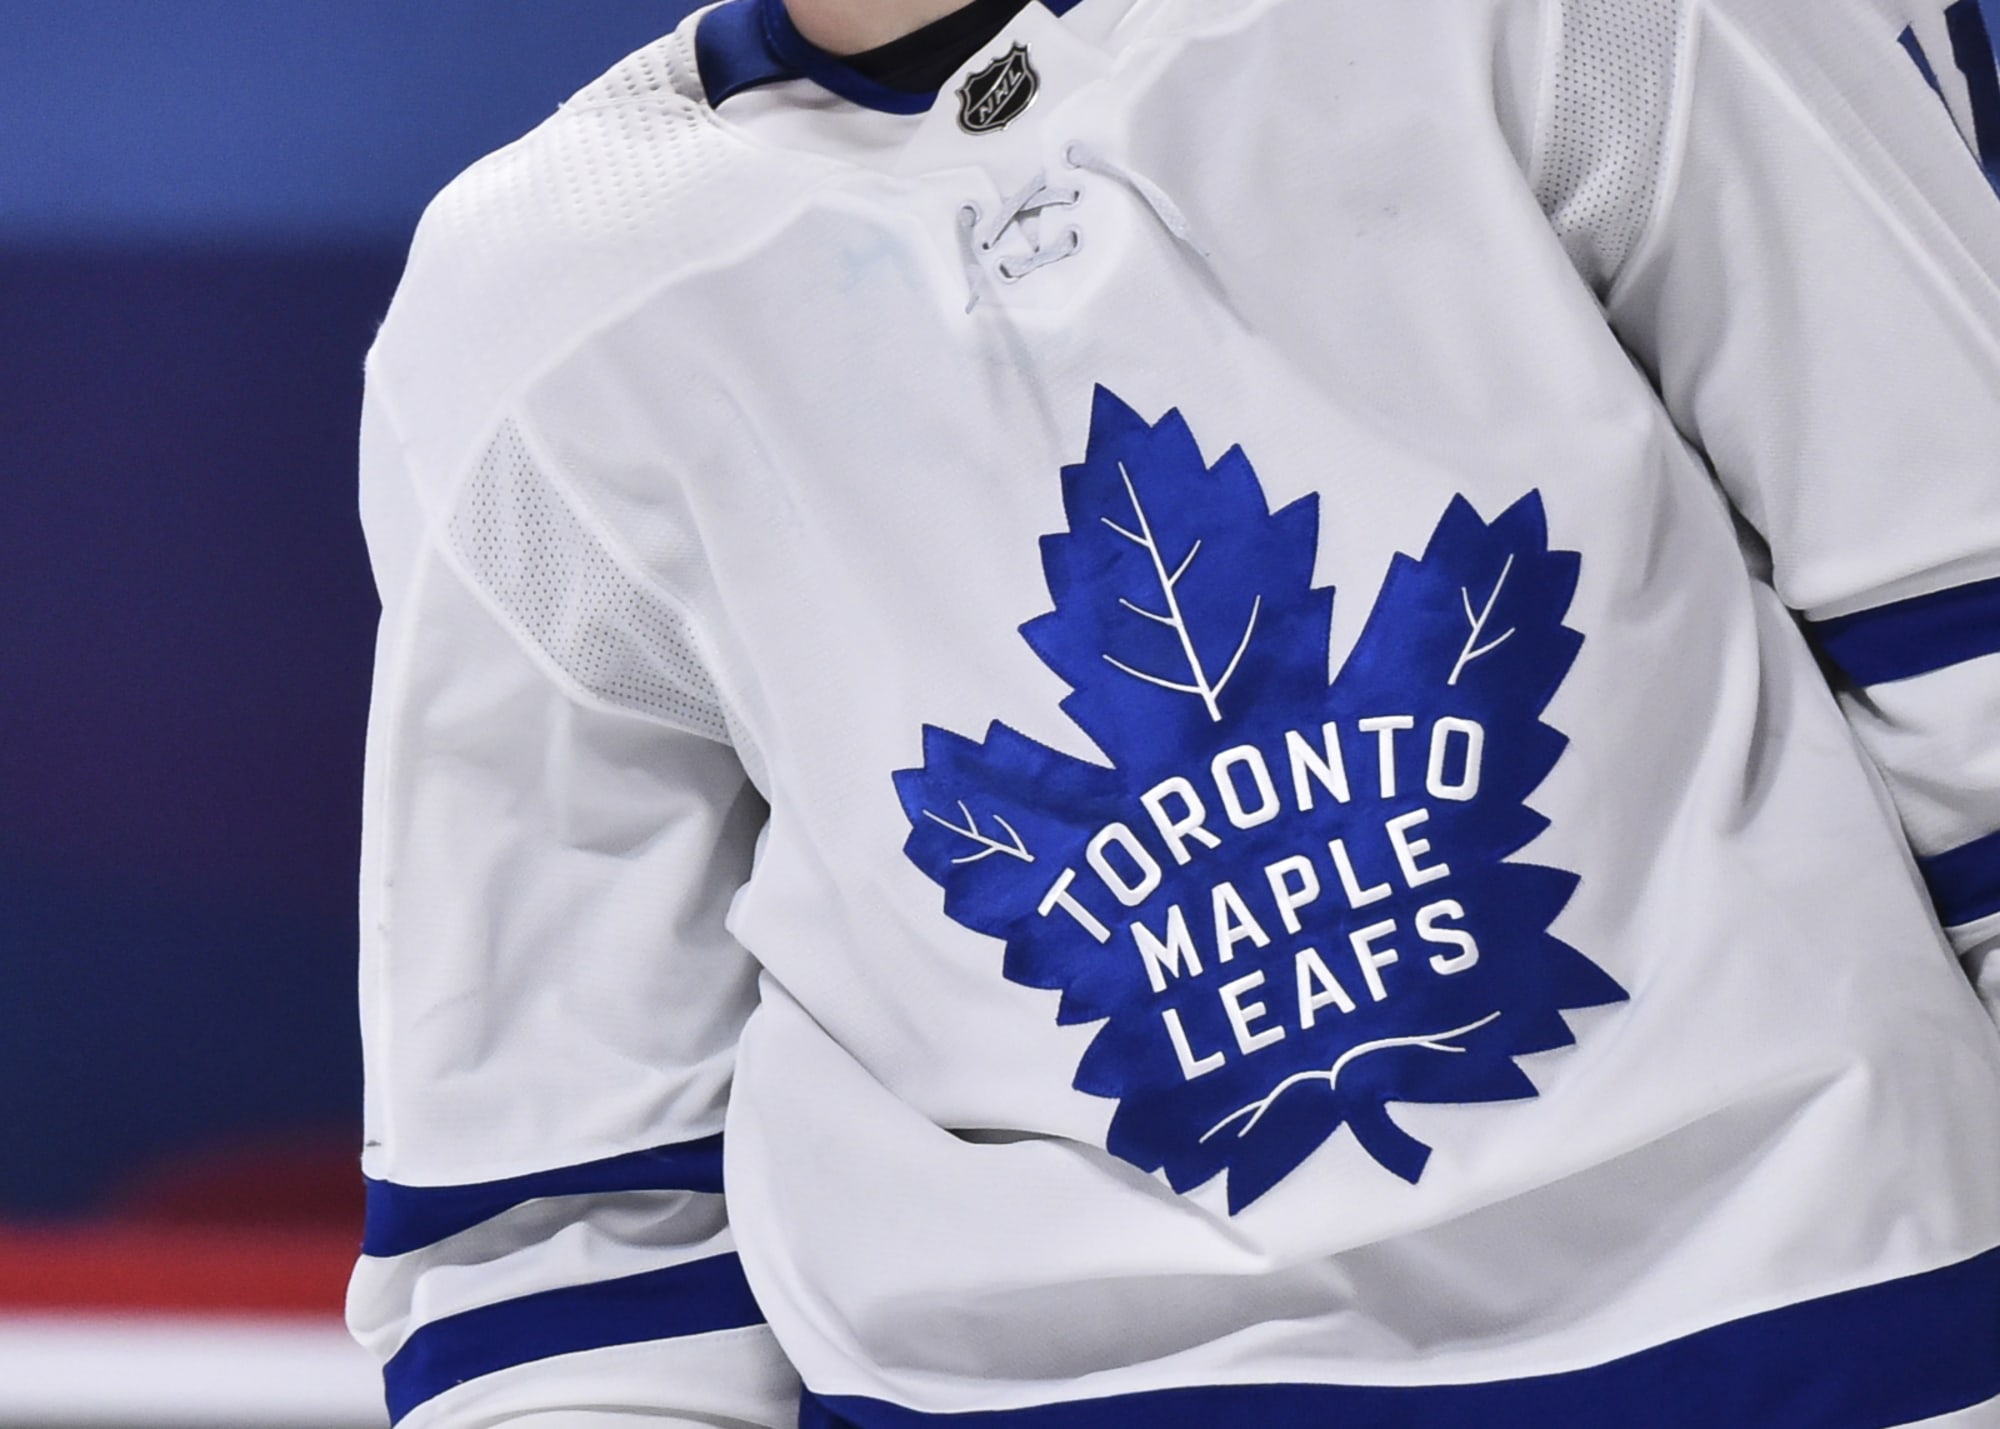 Toronto Maple Leafs to Wear “Milk” Patch Starting in 2022-23 and Continuing  into Future Years – SportsLogos.Net News